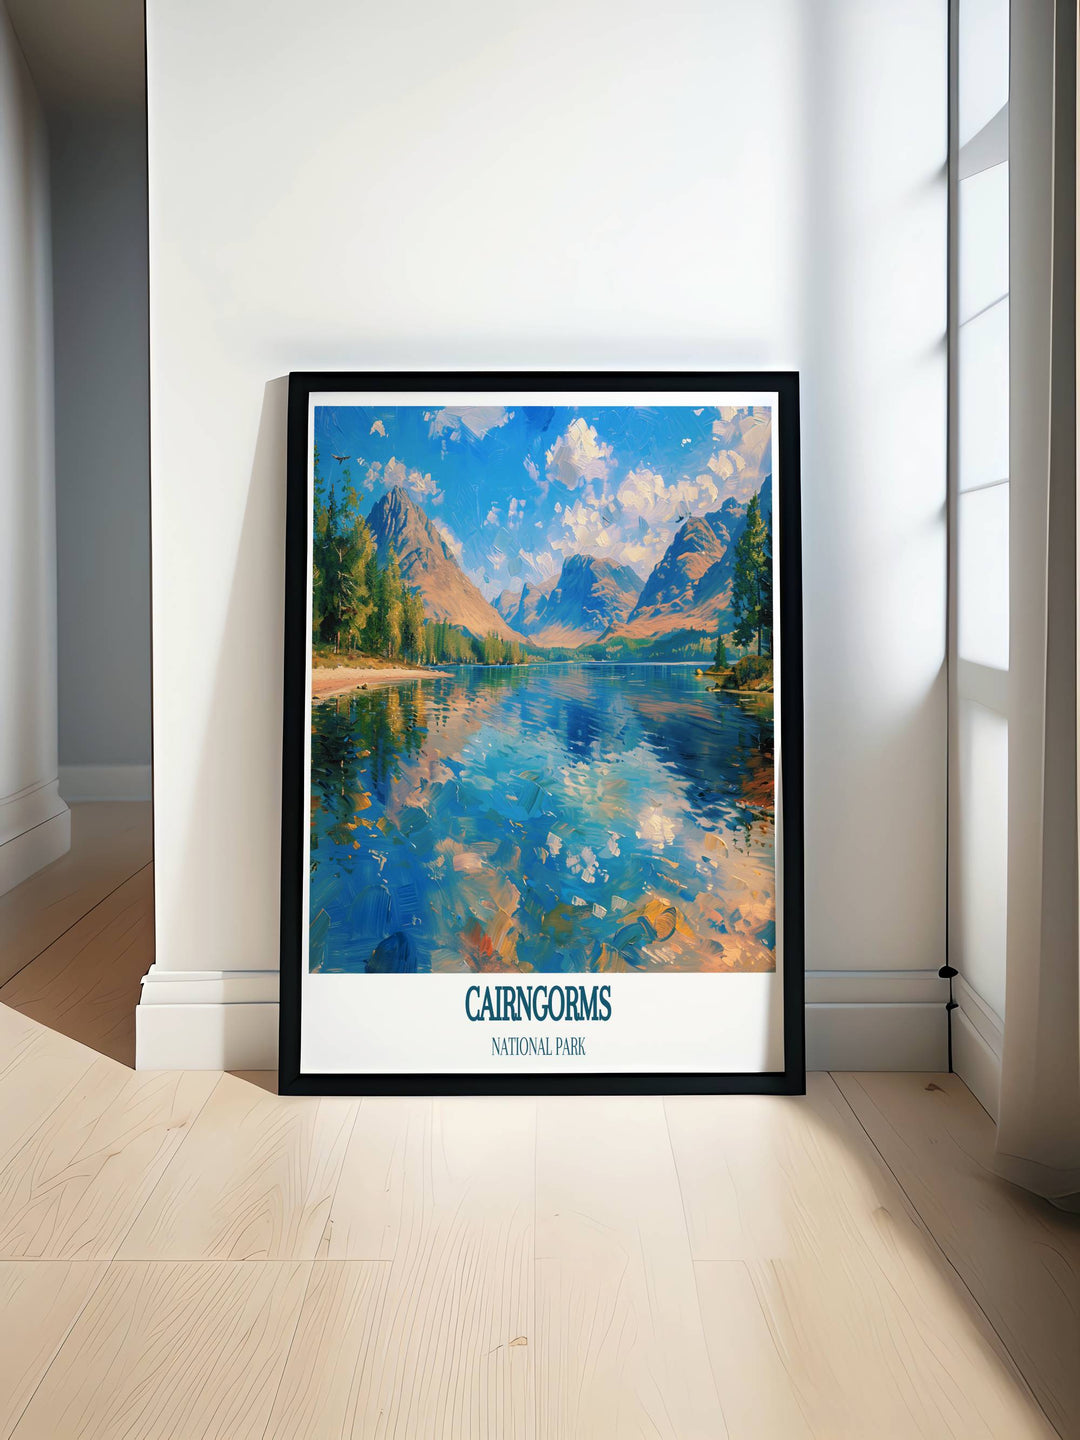 Cairngorms Poster featuring the majestic landscapes of Scotland with Loch Morlich in the background. Perfect for home decor and gifts, this vintage travel print captures the beauty of the Scottish Highlands.